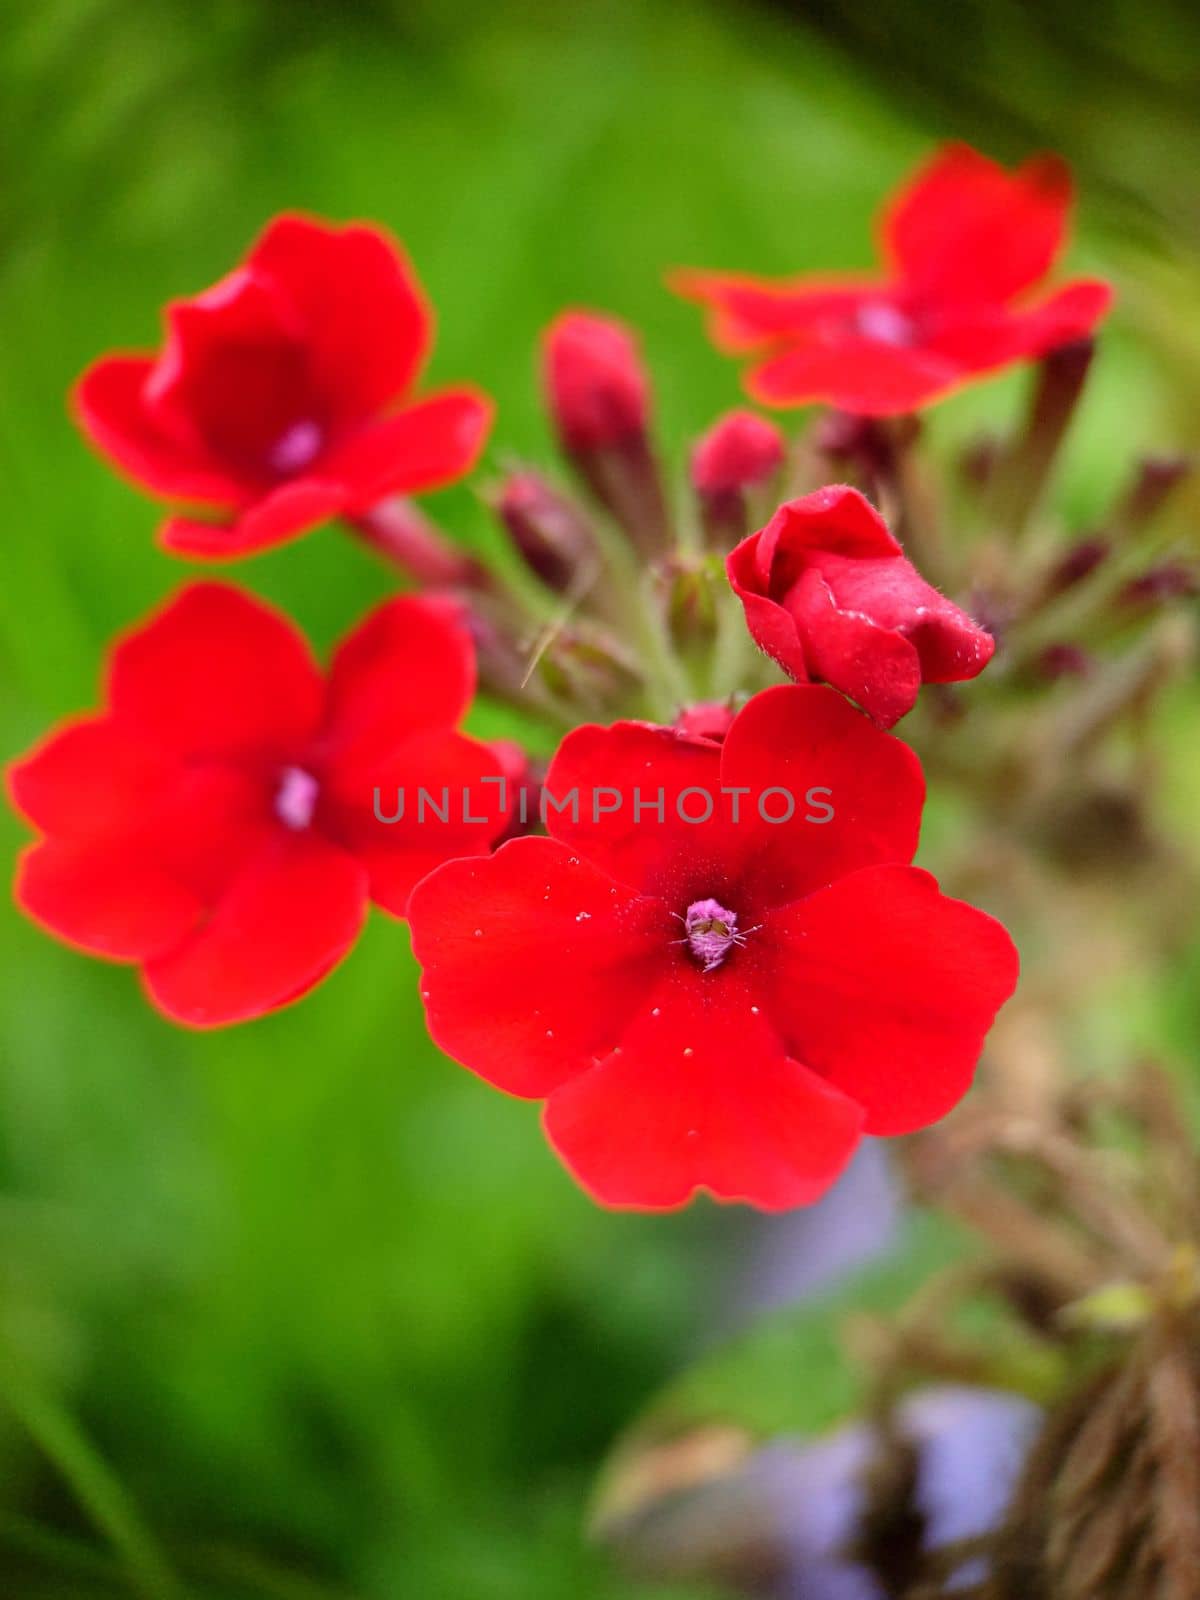 Red verbena bloomed on a summer day against the background of grass by Mastak80